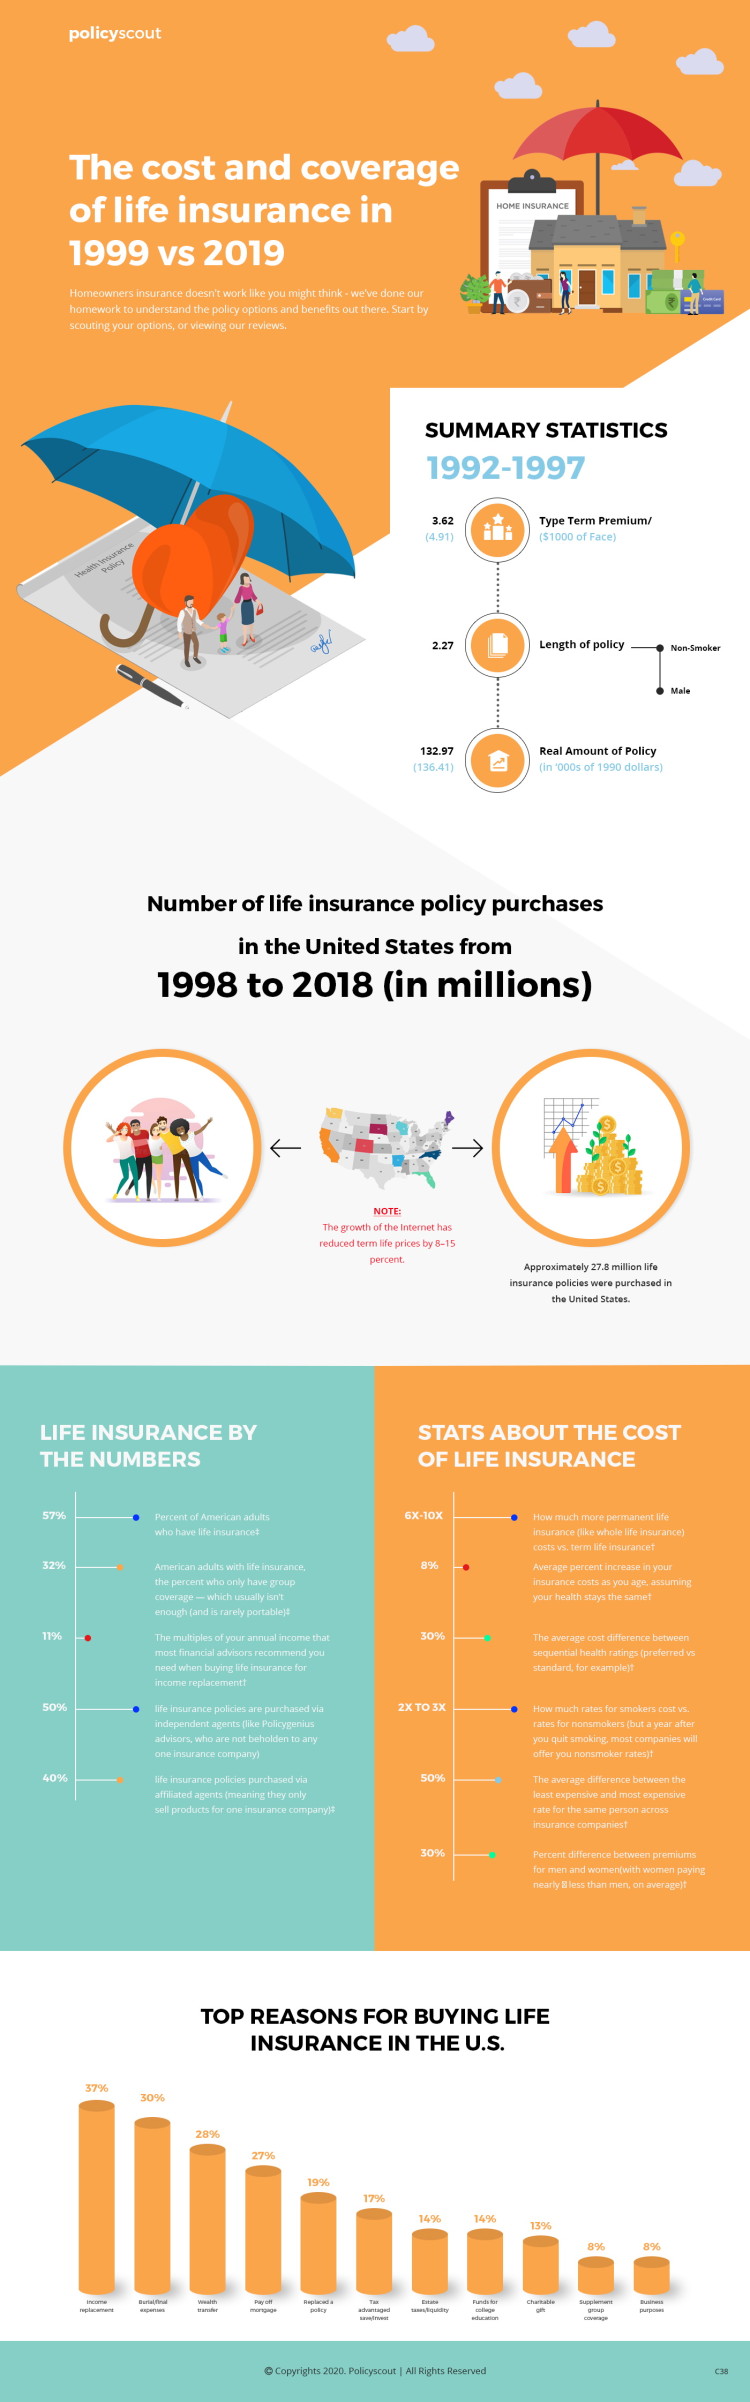 Life insurance 2019 1999 infographic